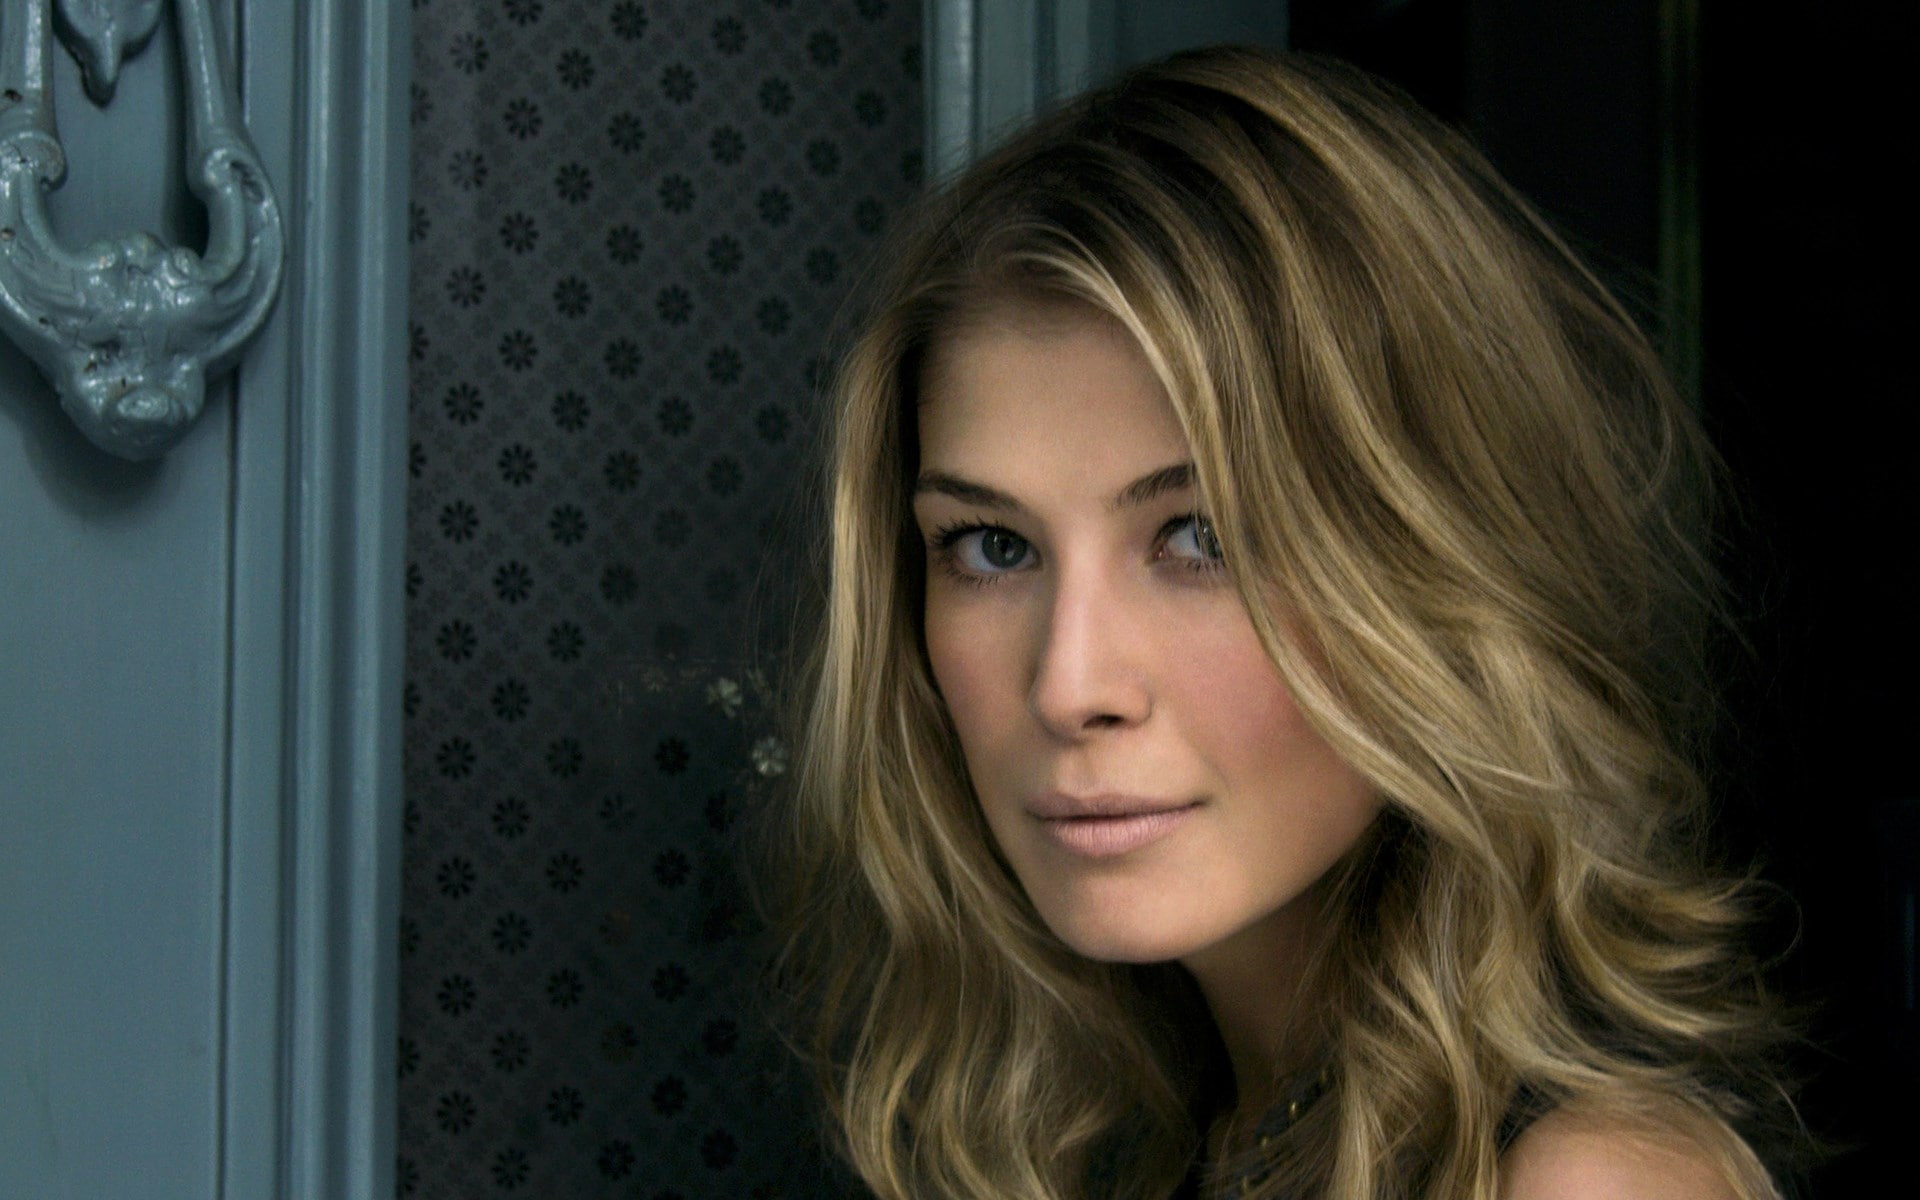 rosamund pike, headshot, portrait, hair, one person, young adult